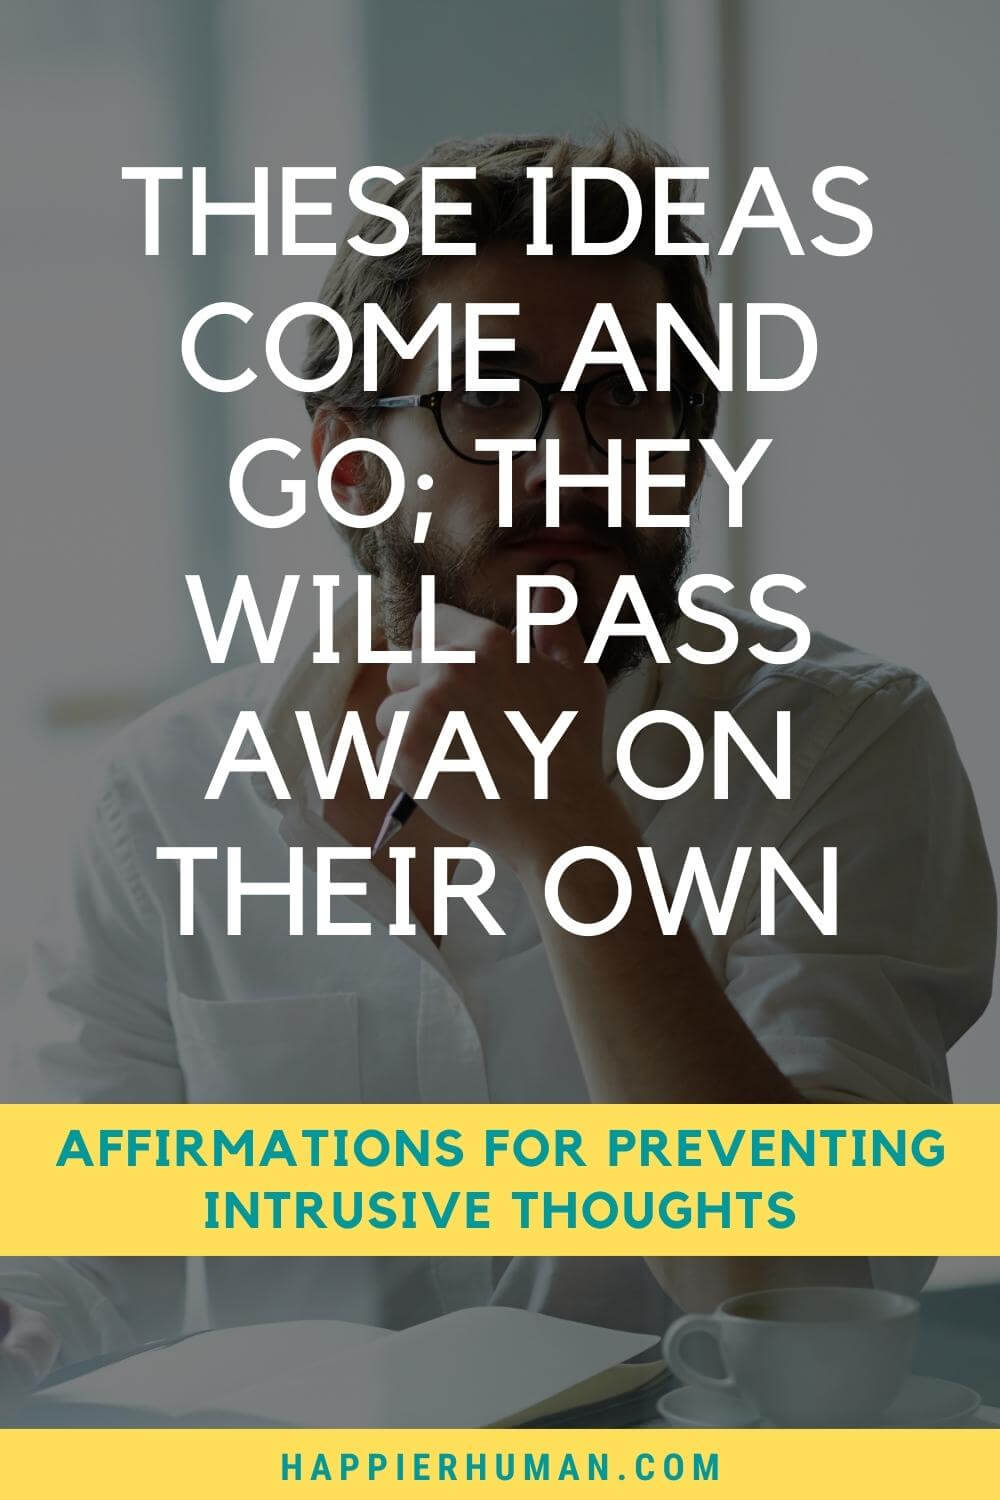 Affirmations for Intrusive Thoughts - These ideas come and go; they will pass away on their own | affirmations for feeling like a burden | affirmations for rumination | morning affirmations for ocd